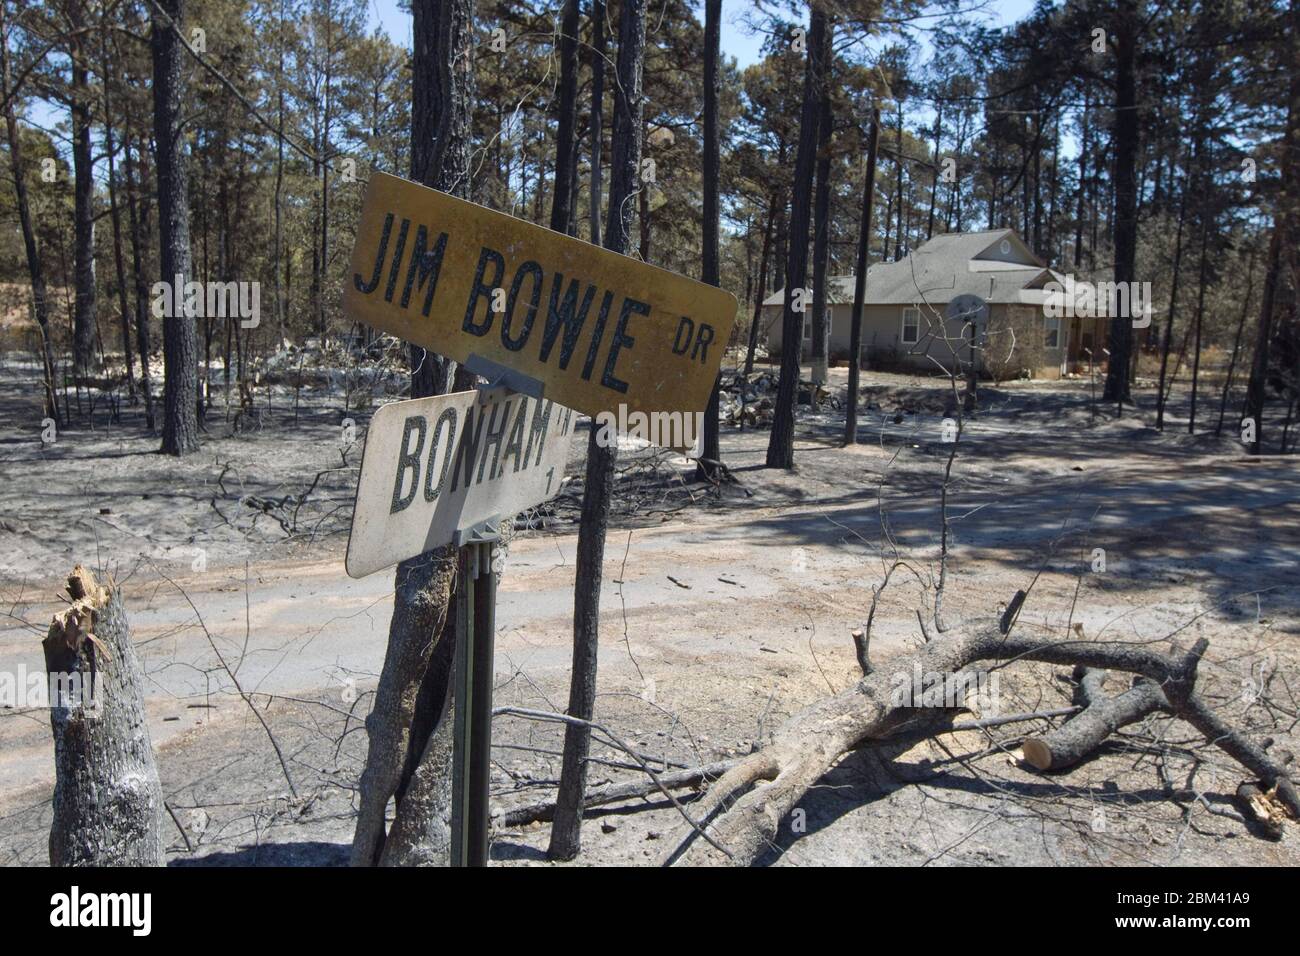 Bastrop County Texas USA, September 9 2011: Scorched street signs show how close fire came to an unburned home in the aftermath of wildfires that raced through the piney woods in Bastrop County 30 miles east of Austin. The fires destroyed 1,400 houses and scorched over 38,000 acres while it was out of control for five days. ©Bob Daemmrich Stock Photo